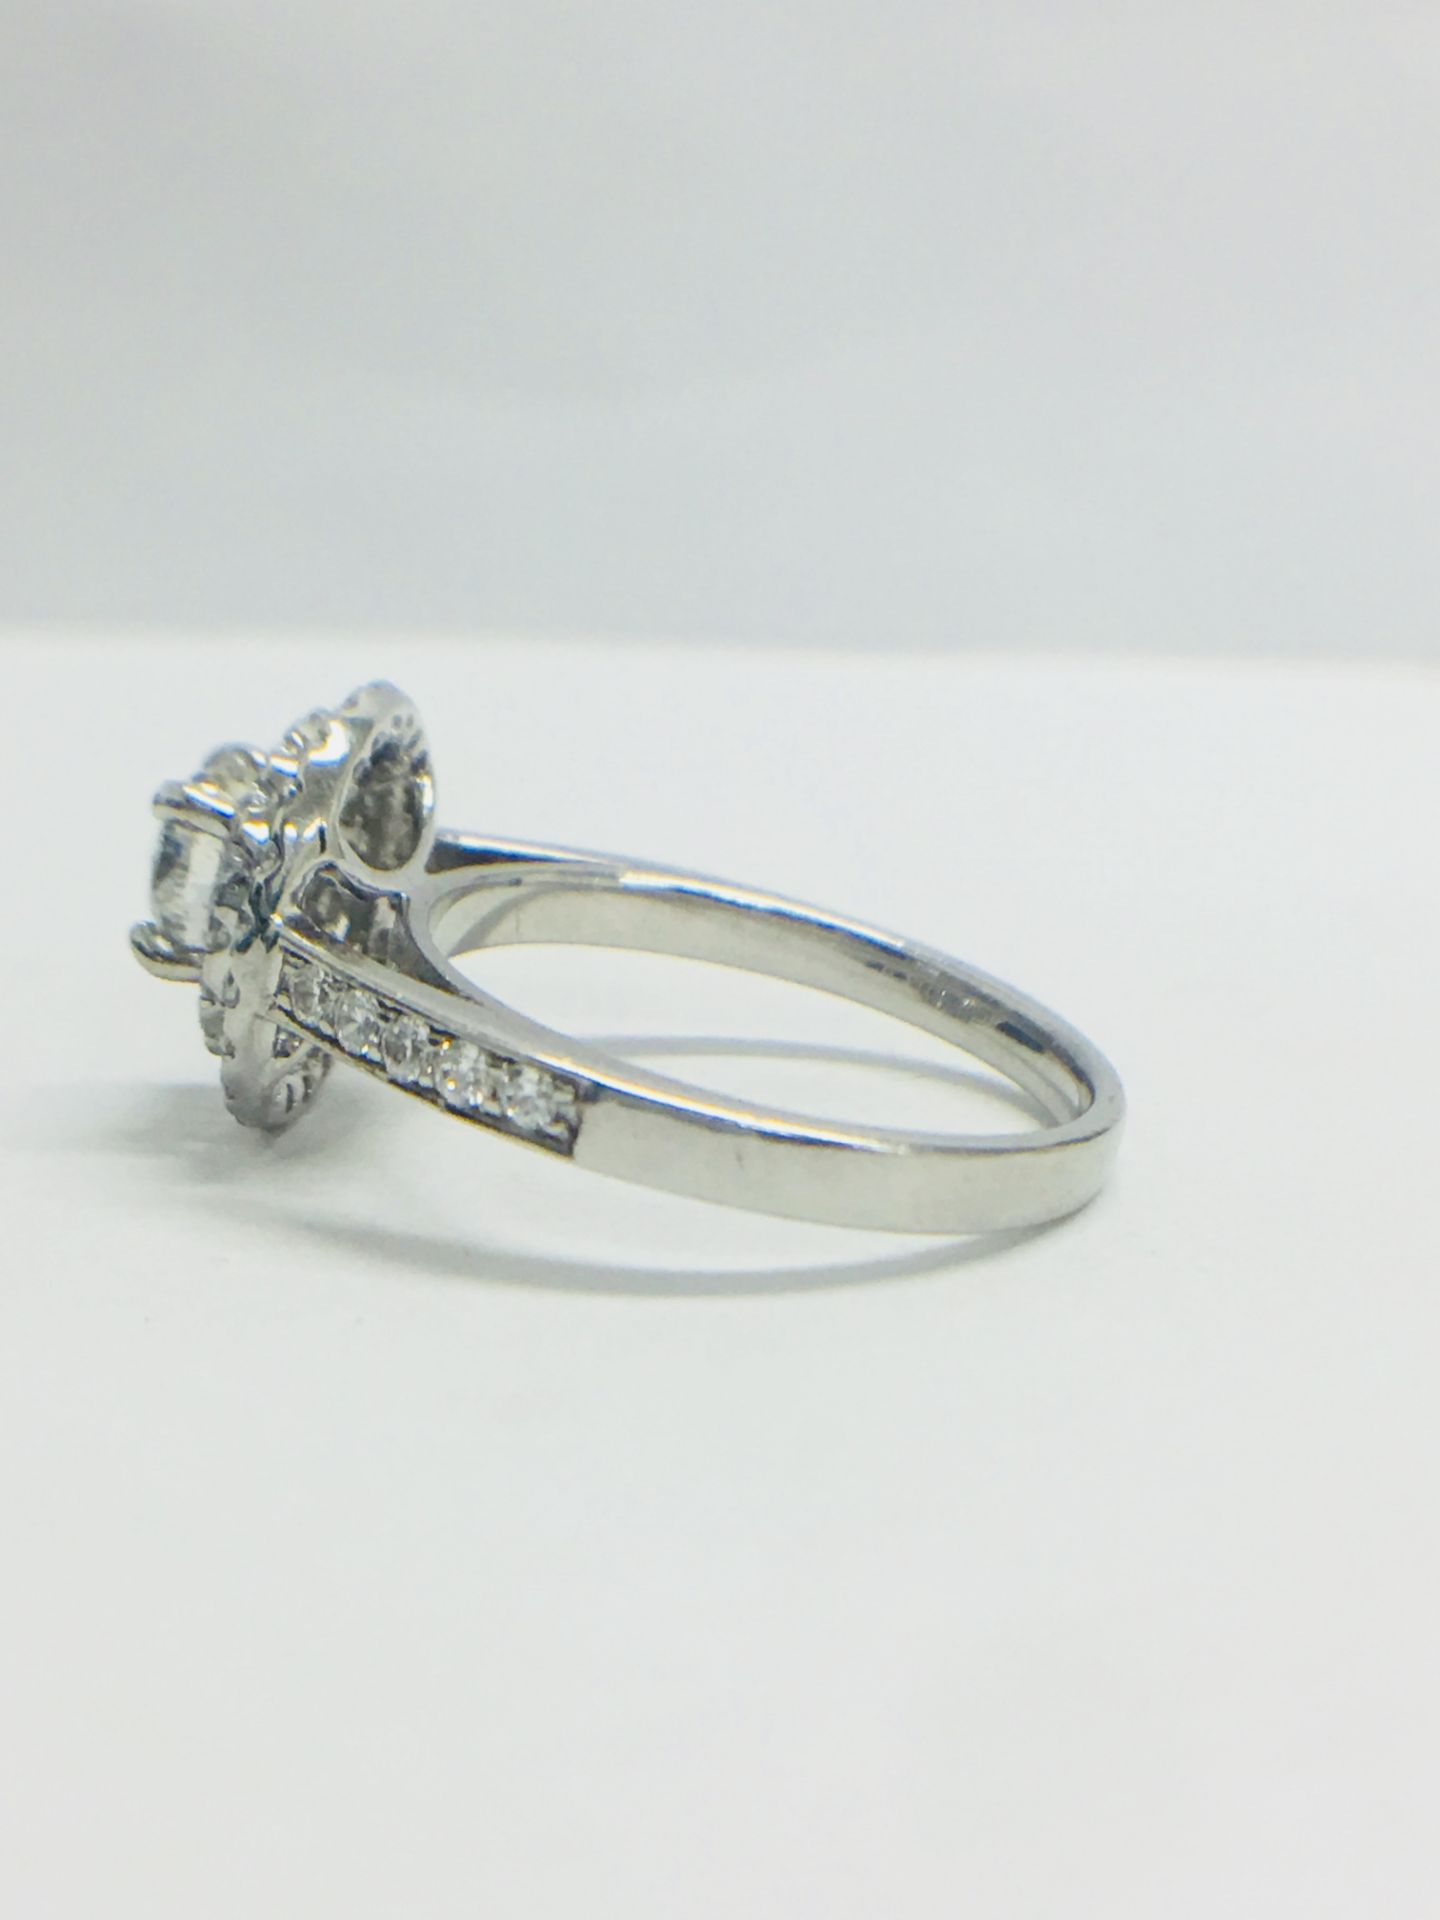 Platinum Double Halo Style Ring1.40Ct Total Diamond Weight, - Image 4 of 11